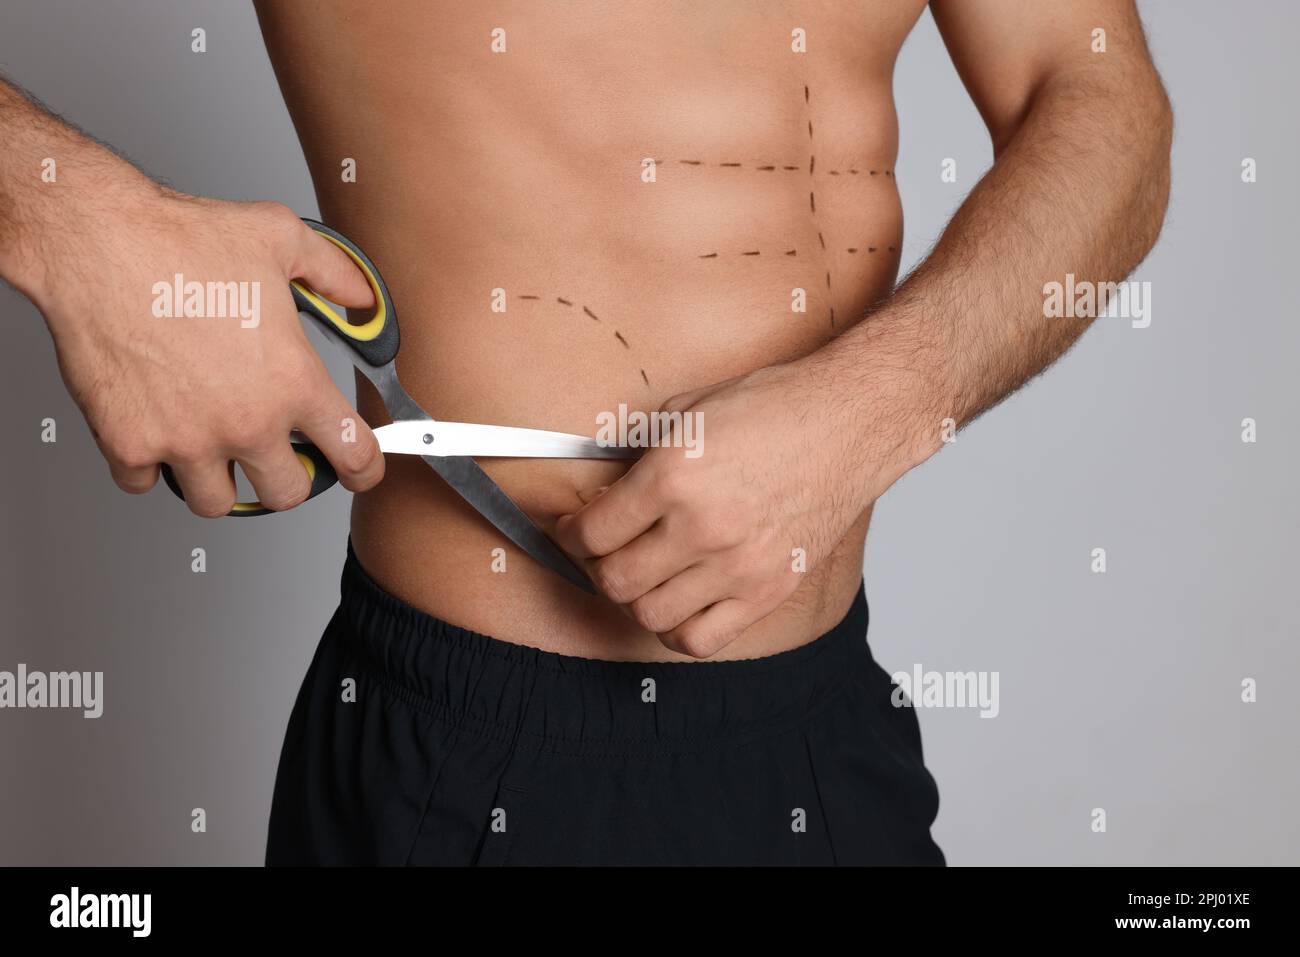 Fit man with scissors and marks on body against grey background, closeup. Weight loss surgery Stock Photo